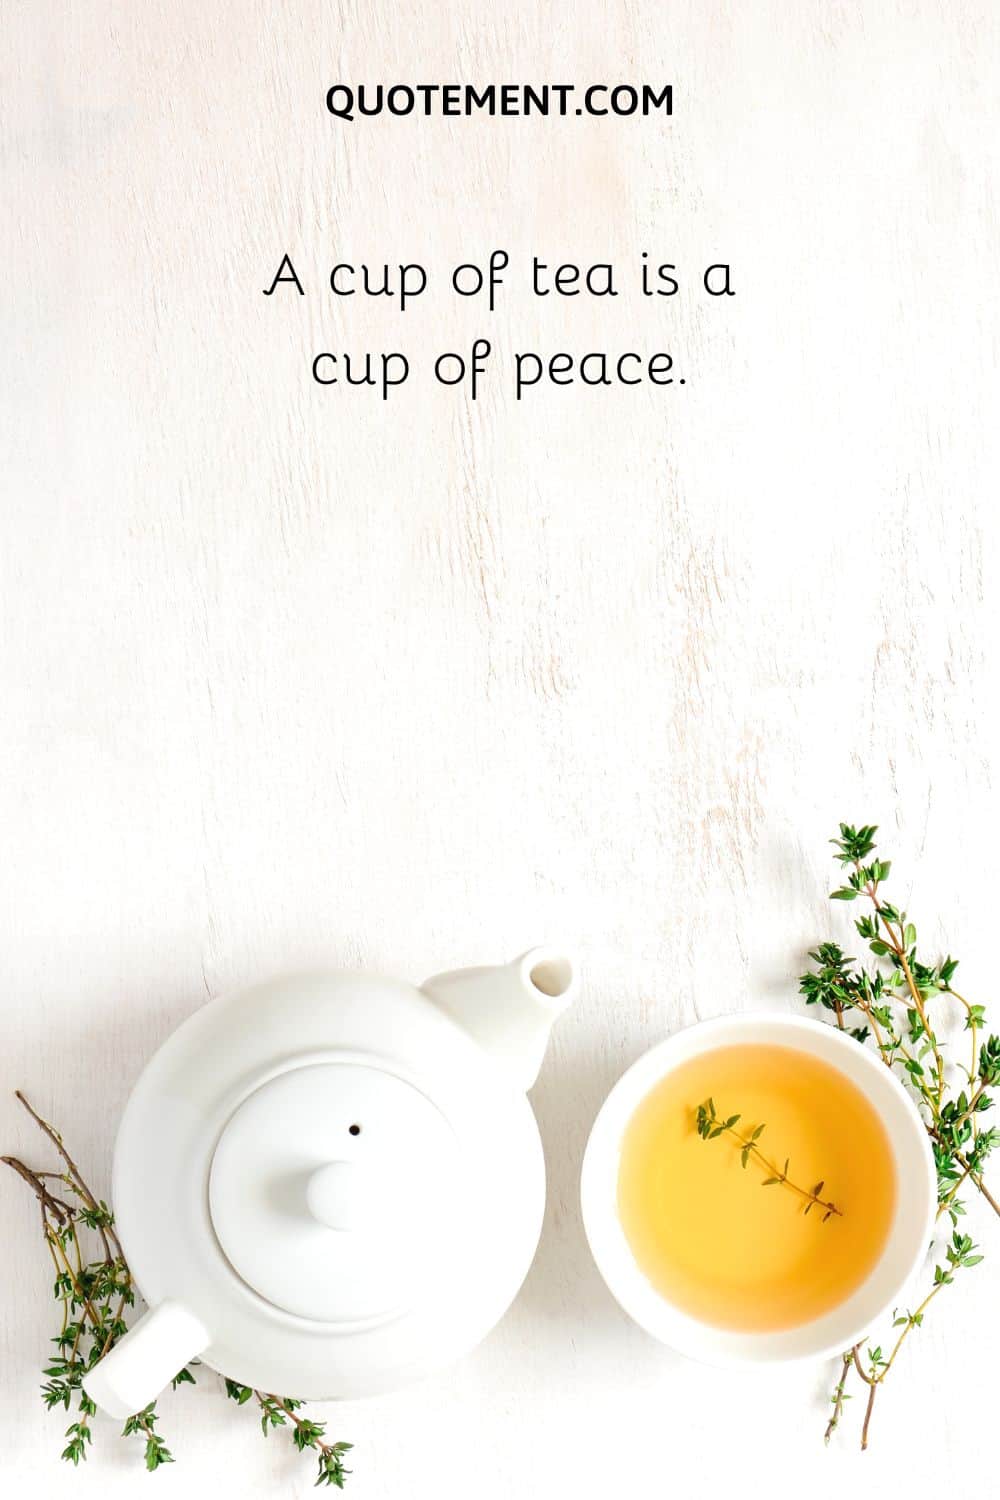 A cup of tea is a cup of peace.